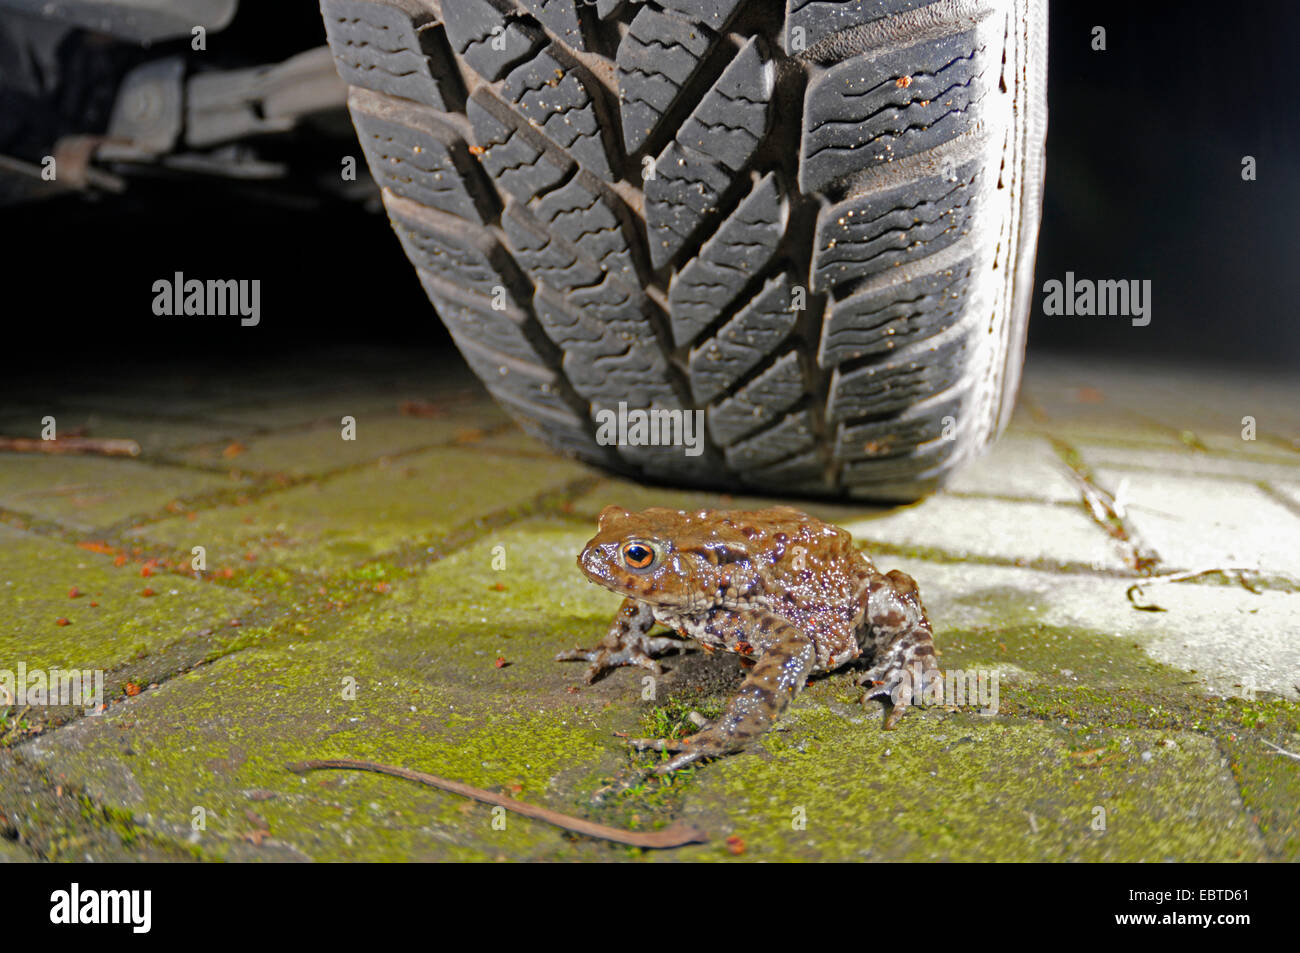 European common toad (Bufo bufo), sitting on a paved path in front of a car wheel, Germany Stock Photo